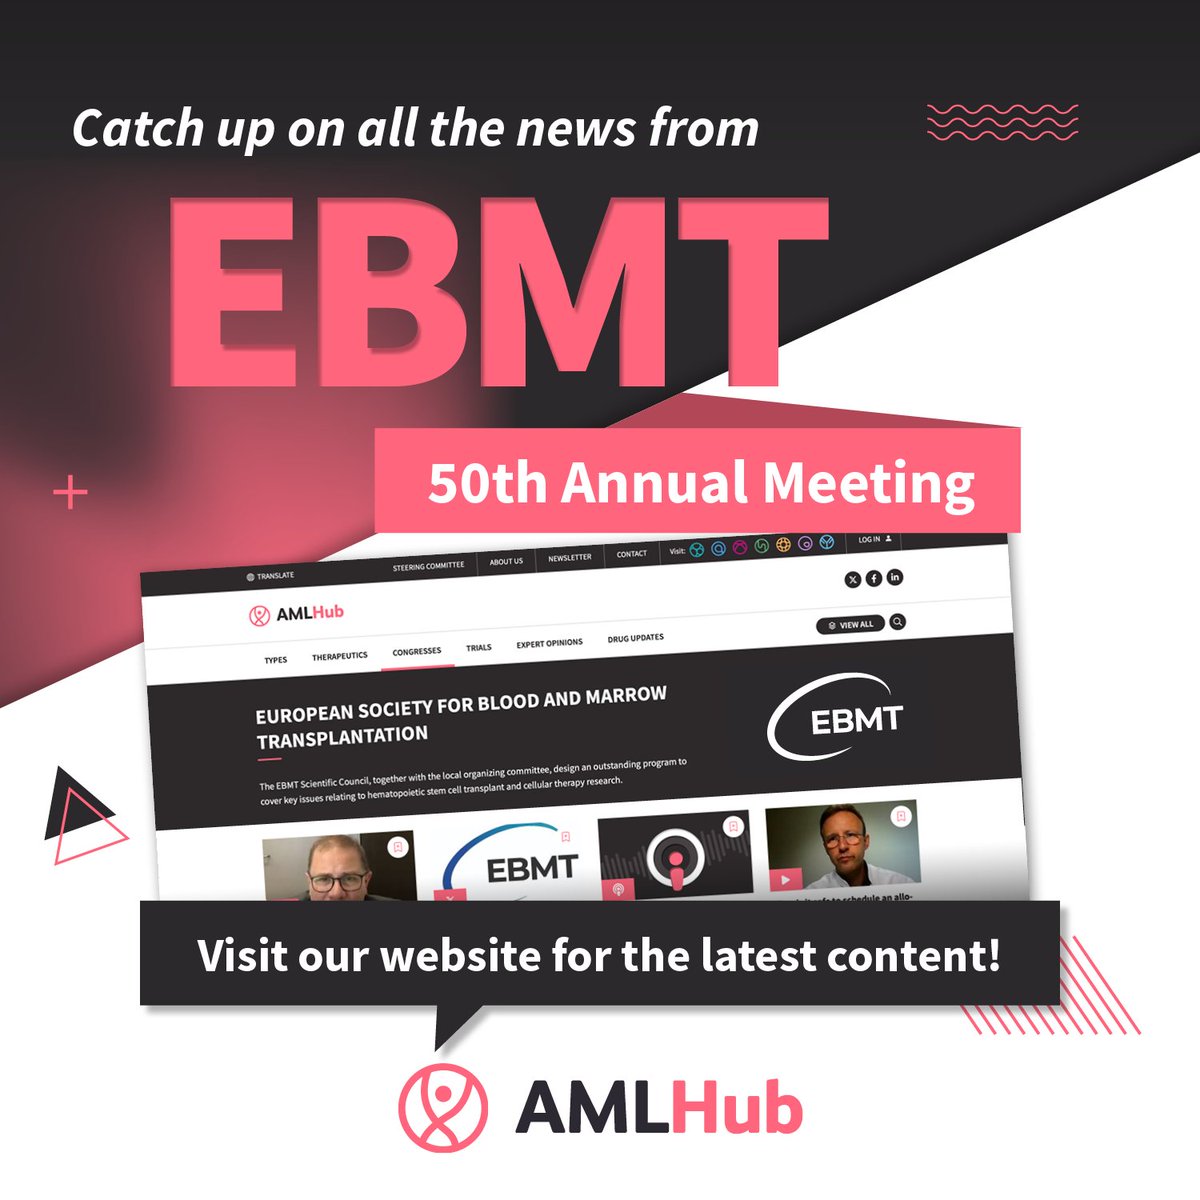 We hope you enjoyed following our live updates and congress coverage from #EBMT24! Keep an eye on our socials for post-congress key points and insights. #IME #cancerresearch #EBMT